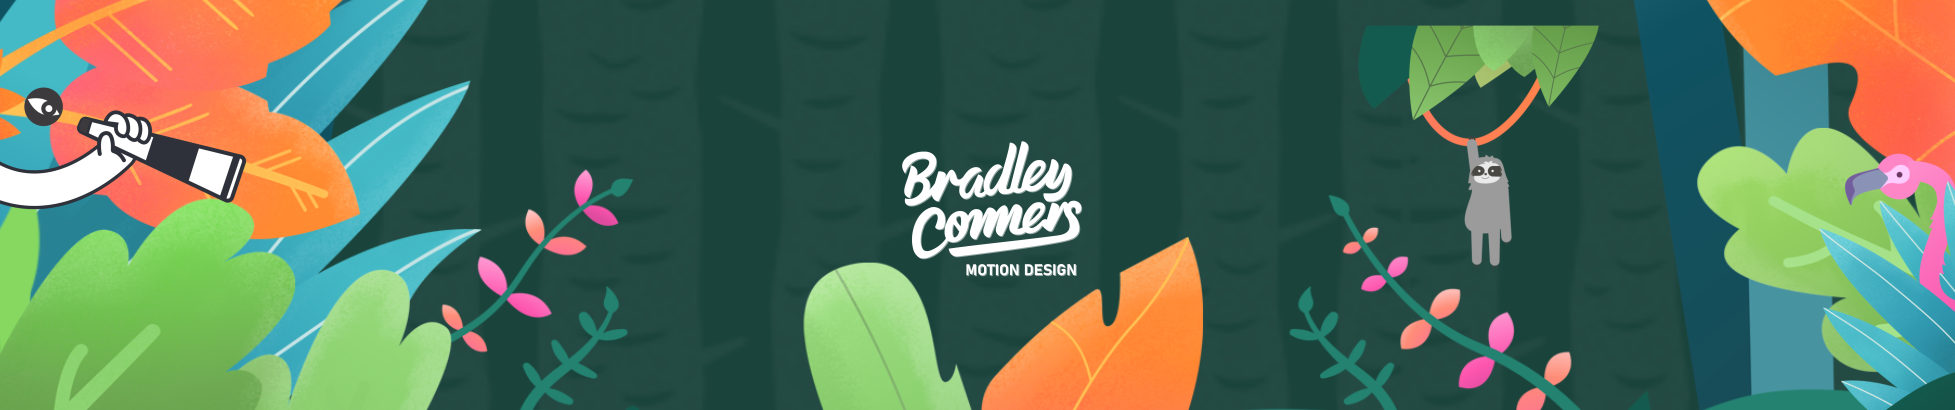 Bradley Conners's profile banner